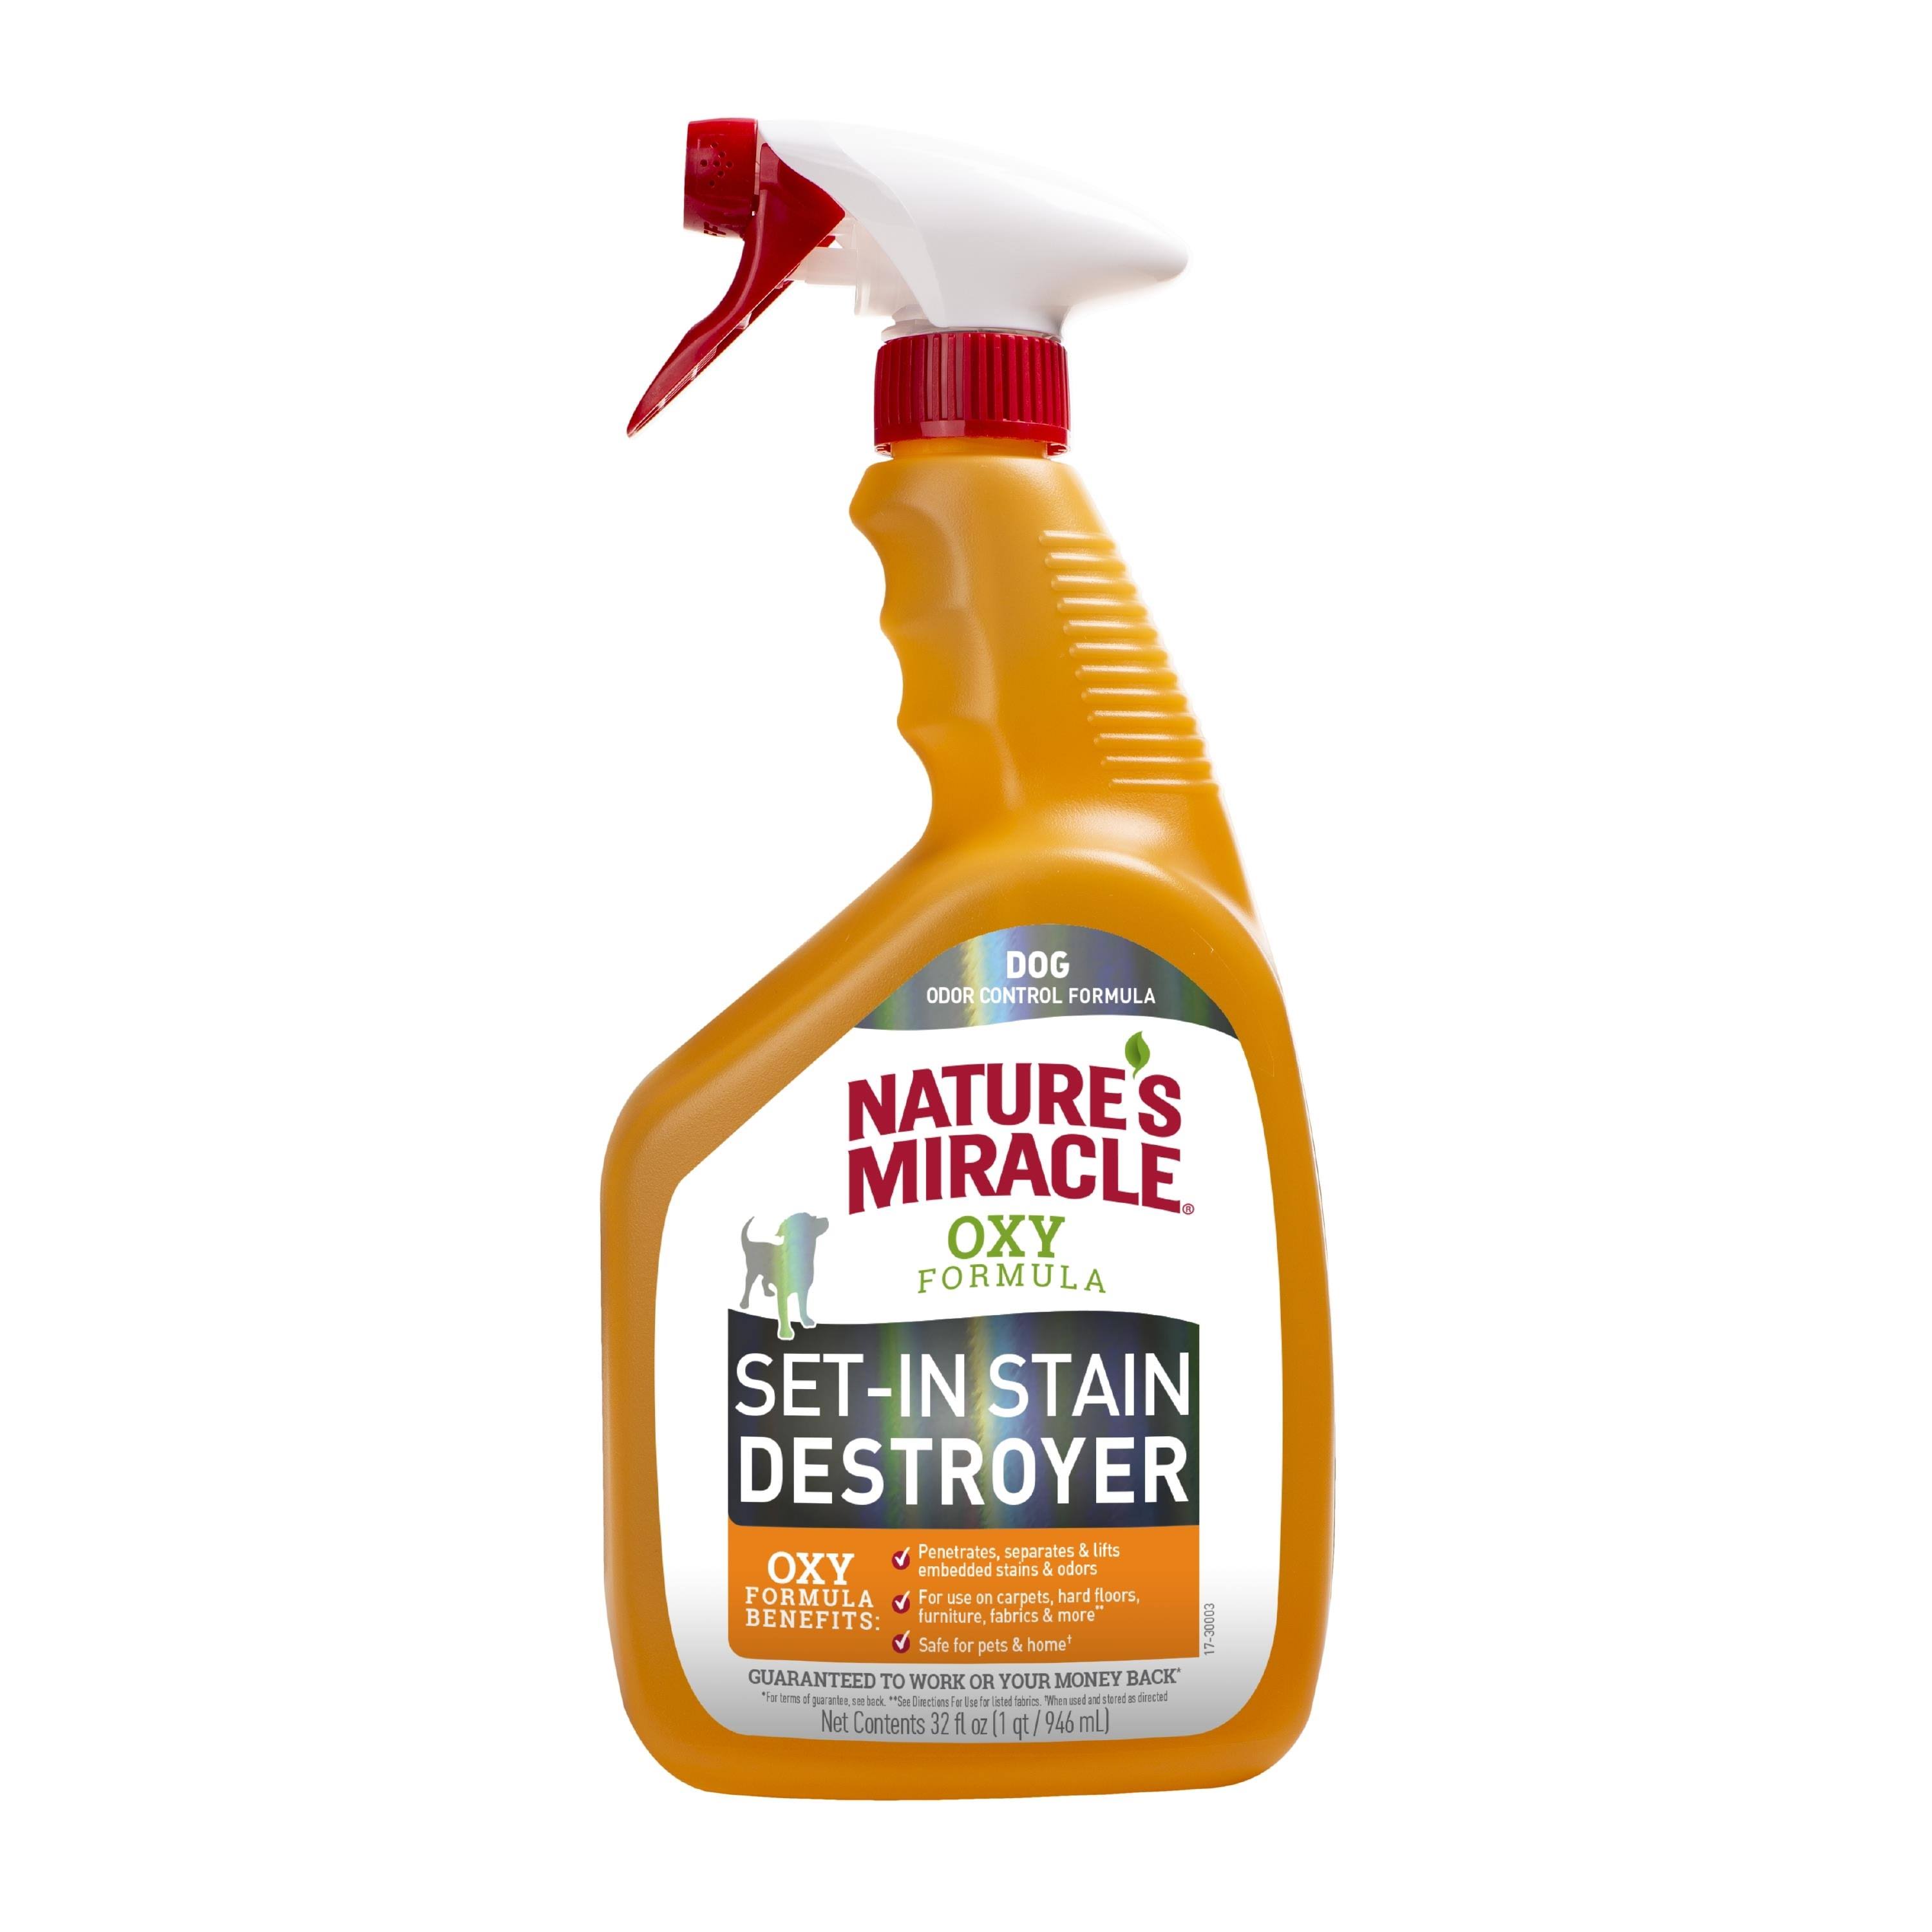 Nature's Miracle Dog Oxy Set in Stain Destroyer 32oz Orange Scent